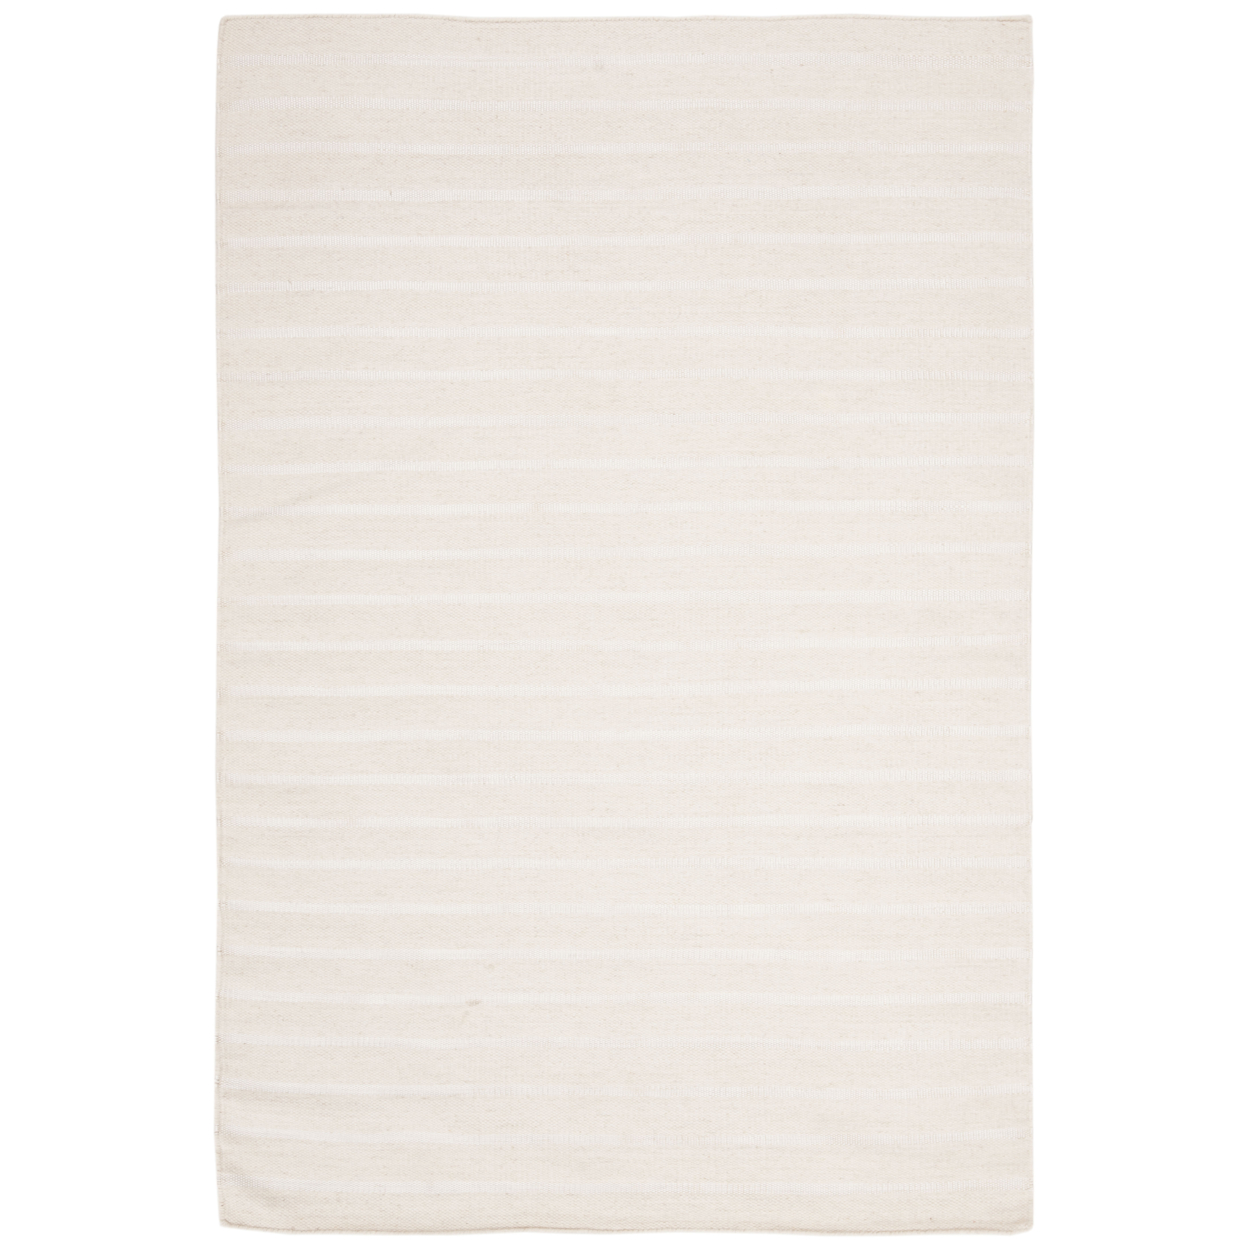 SAFAVIEH Dhurries Collection DHU313D Handwoven White Rug - 3' X 5'